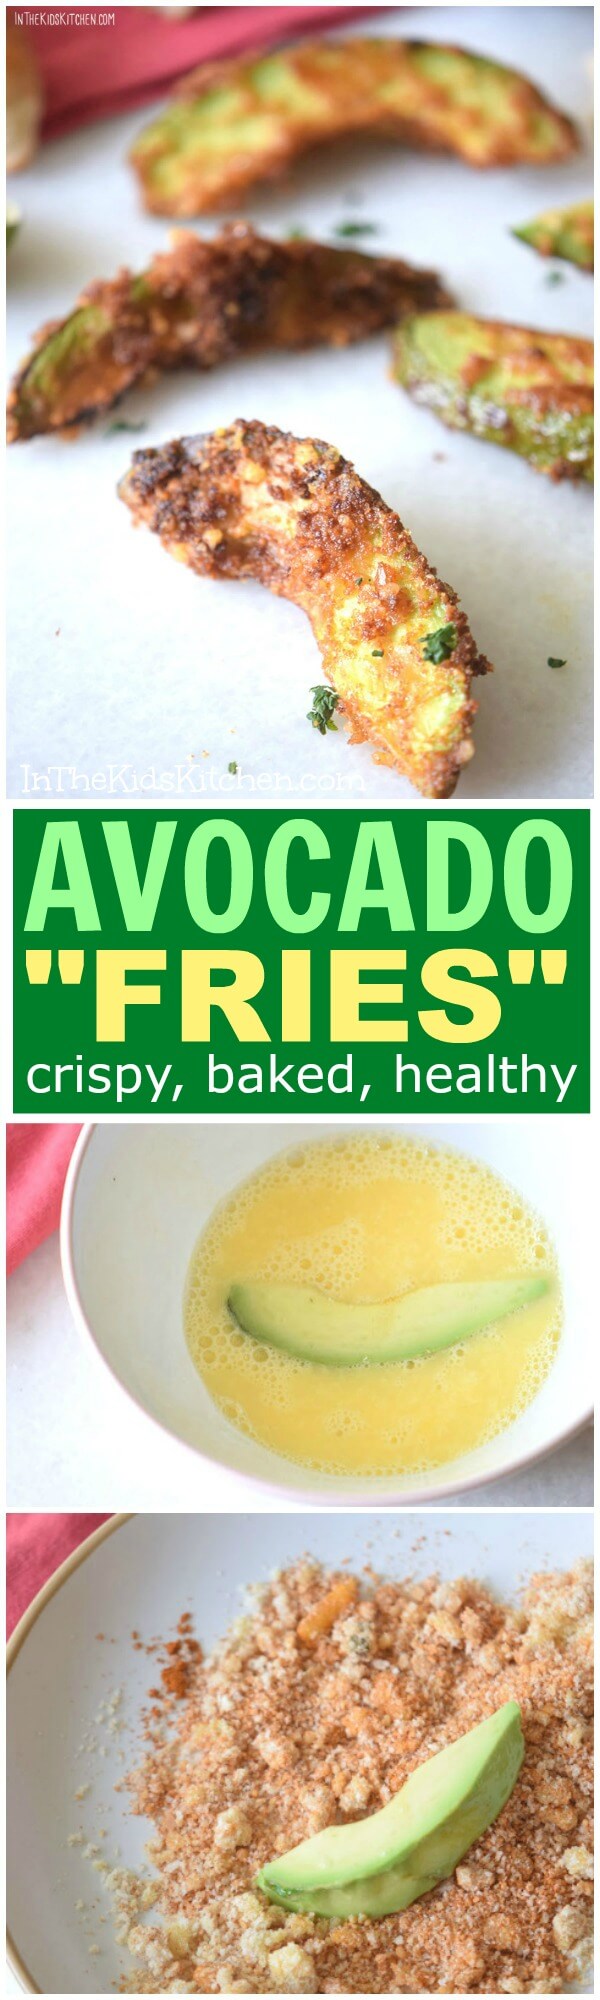 A nutritious (and delicious) alternative to greasy french fries, these Baked Avocado Fries are packed with vitamins and fiber. Plus they're easy to make!